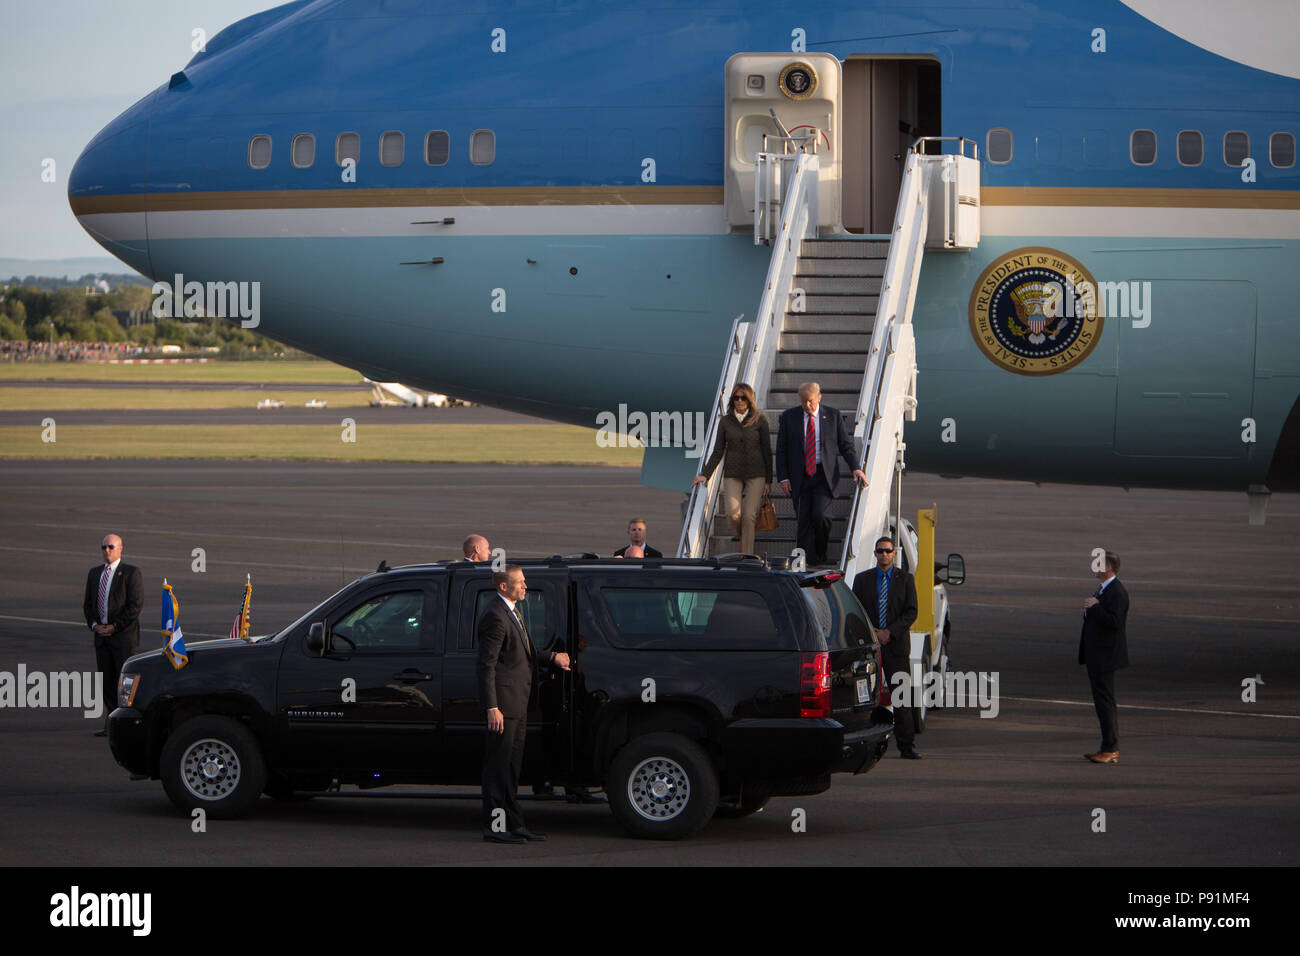 Prestwick, Scotland, on 13 July 2018. President Donald Trump, and wife Melania, arrive on Air Force One at Glasgow Prestwick International Airport at the start of a two day trip to Scotland. Image Credit: Jeremy Sutton-Hibbert/ Alamy News. Stock Photo